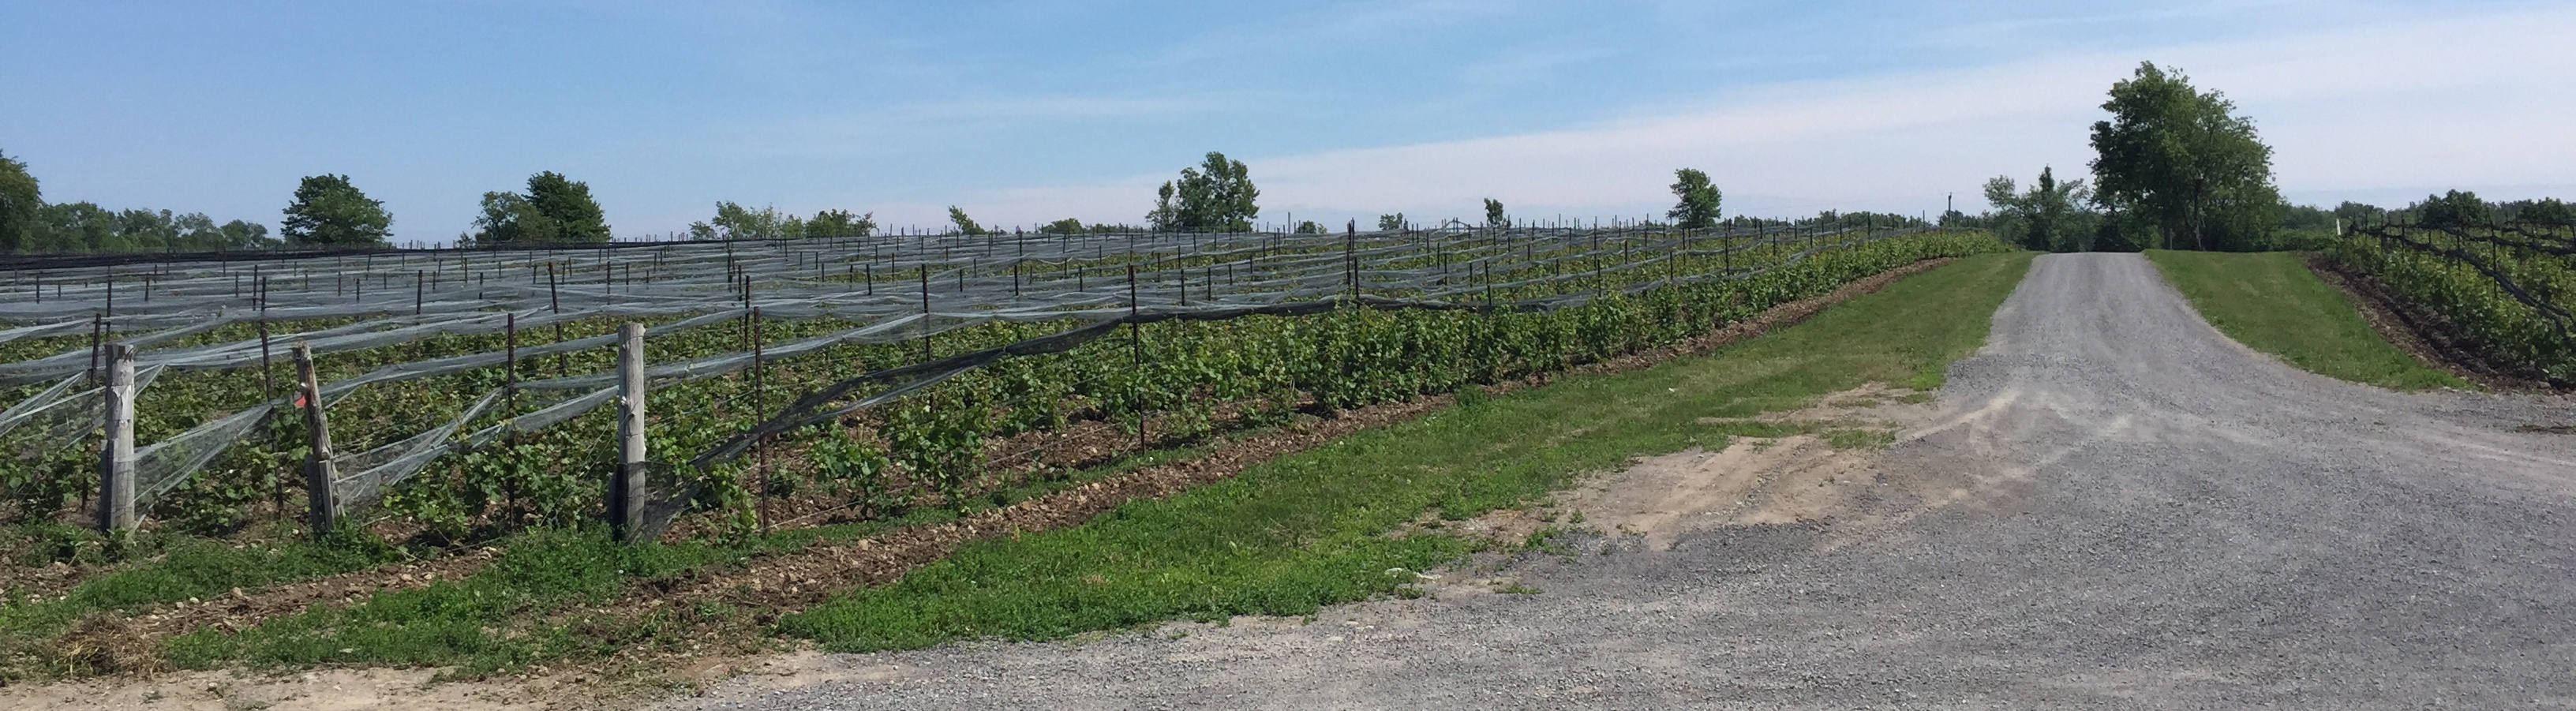 Wineries in Prince Edward County, Ontario